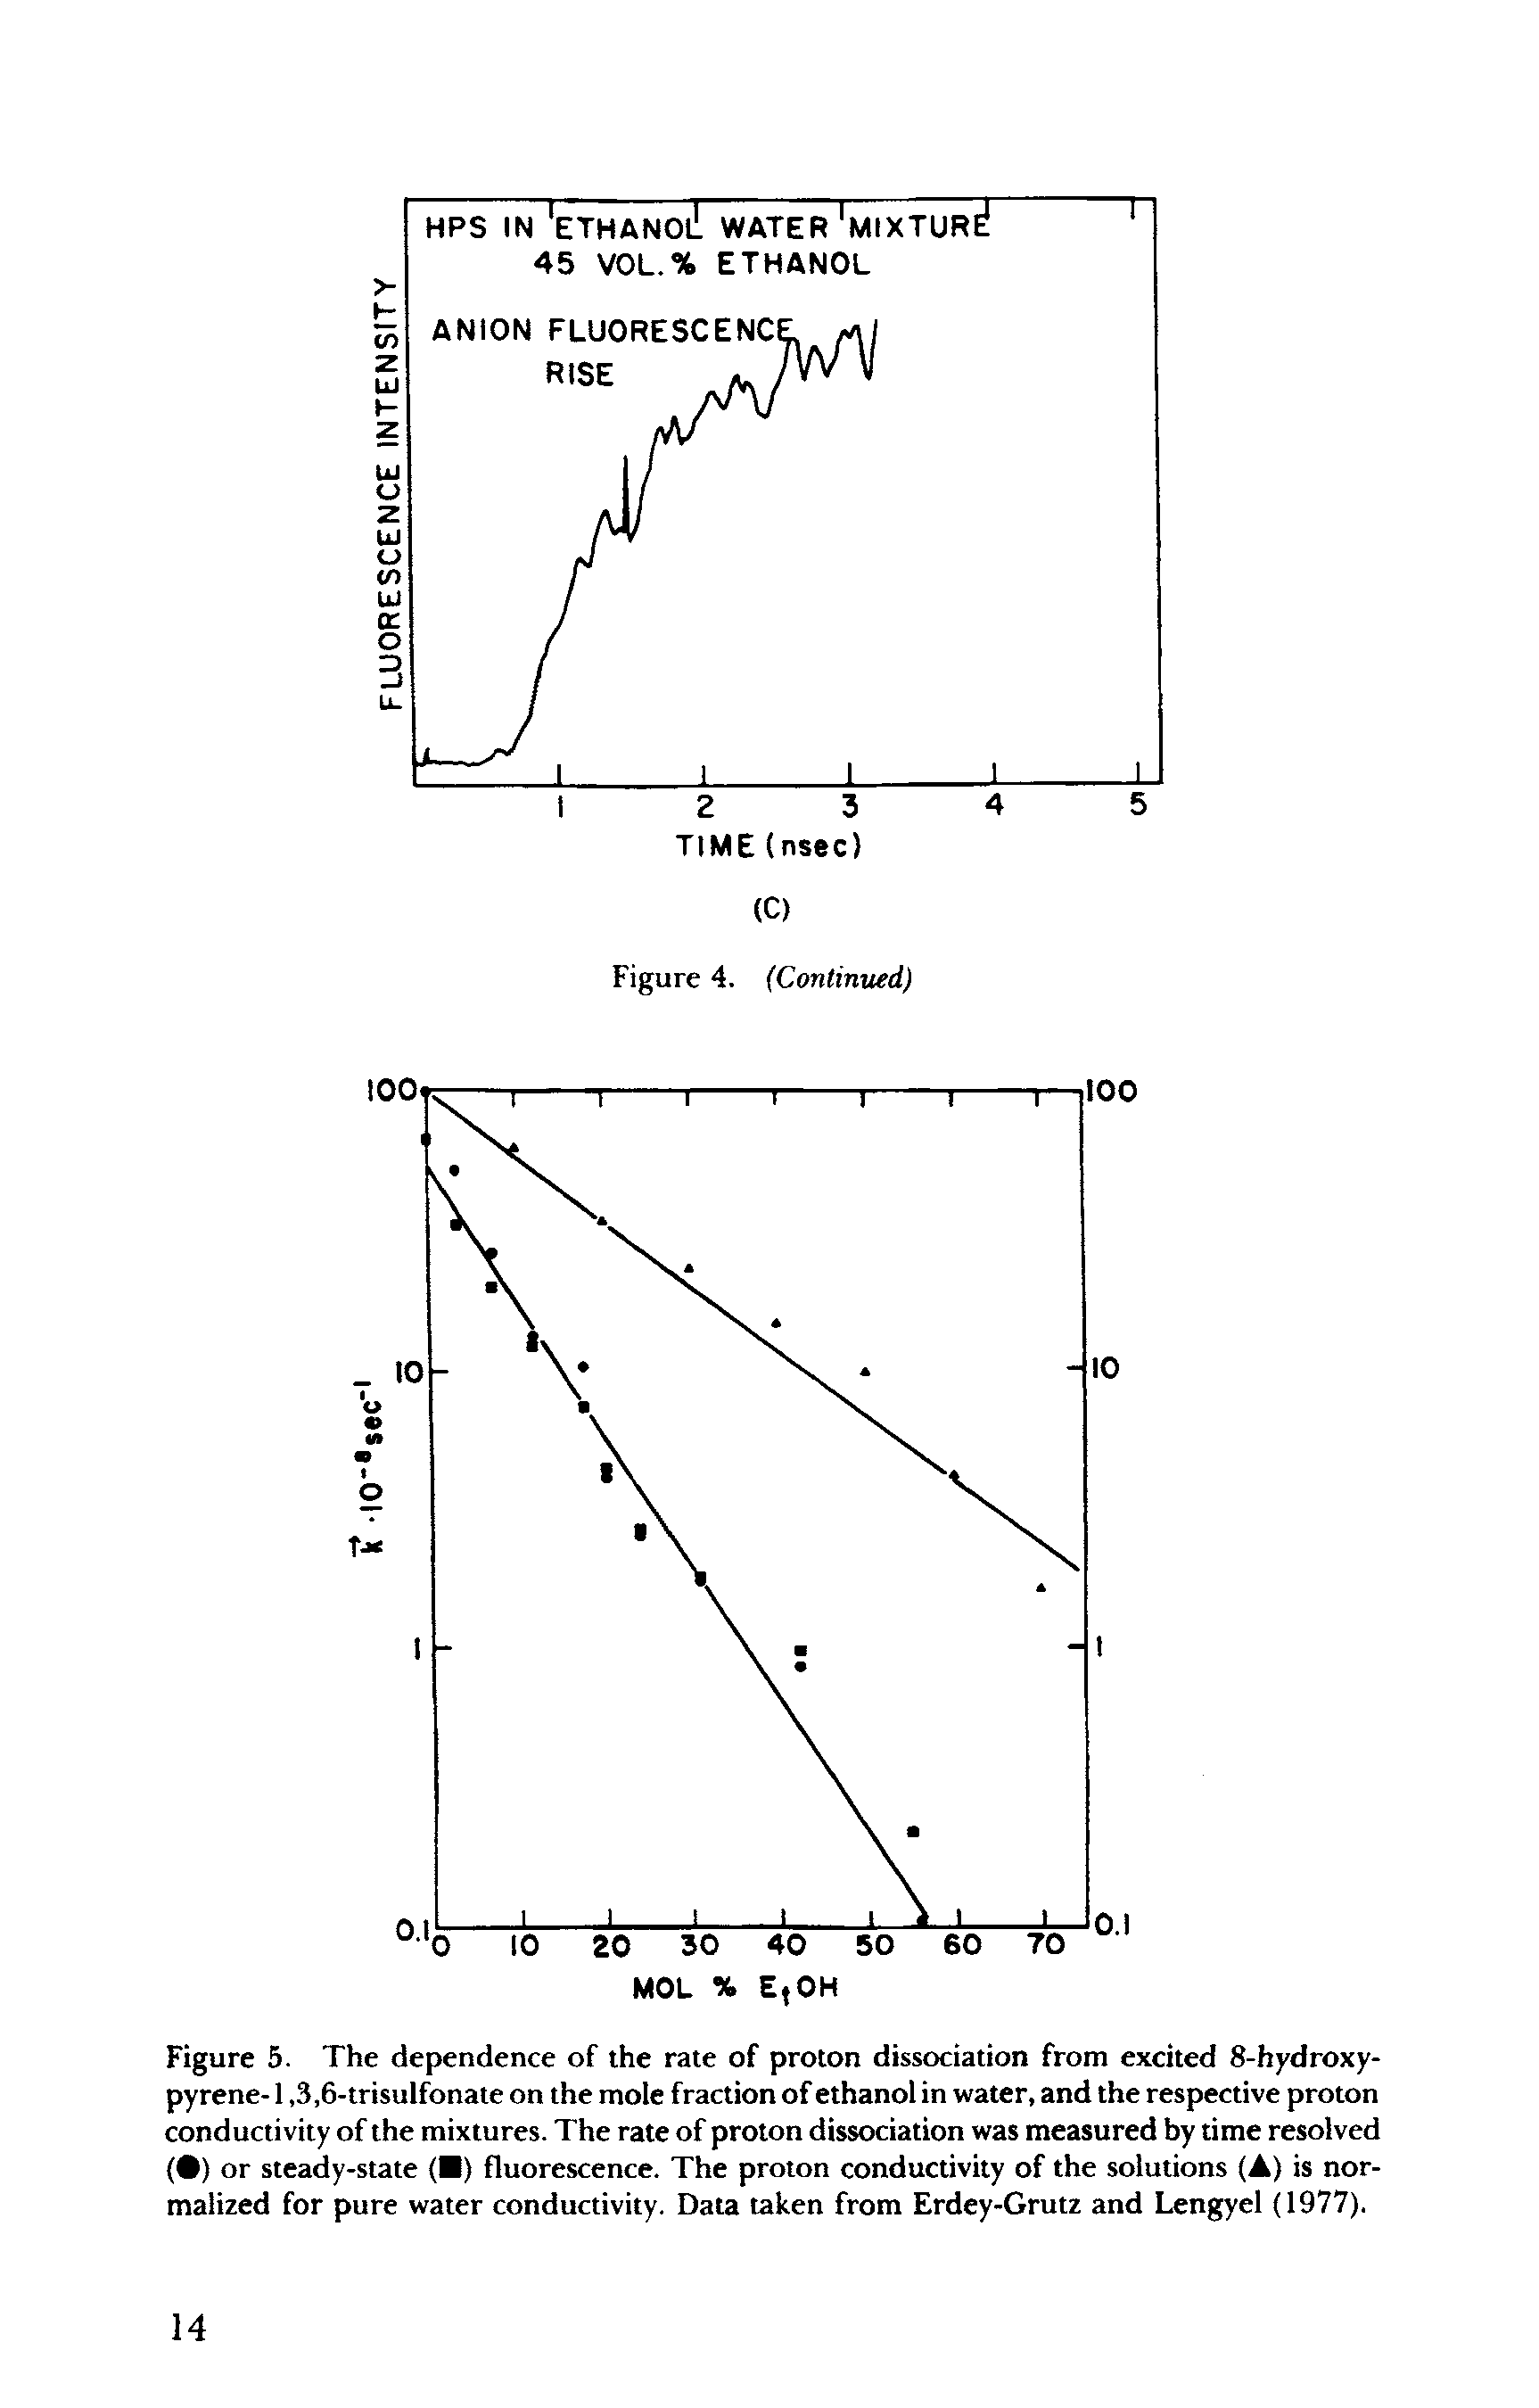 Figure 5. The dependence of the rate of proton dissociation from excited 8-hydroxy-pyrene- 1,3,6-trisulfonate on the mole fraction of ethanol in water, and the respective proton conductivity of the mixtures. The rate of proton dissociation was measured by time resolved ( ) or steady-state ( ) fluorescence. The proton conductivity of the solutions (A) is normalized for pure water conductivity. Data taken from Erdey-Grutz and Lengyel (1977).